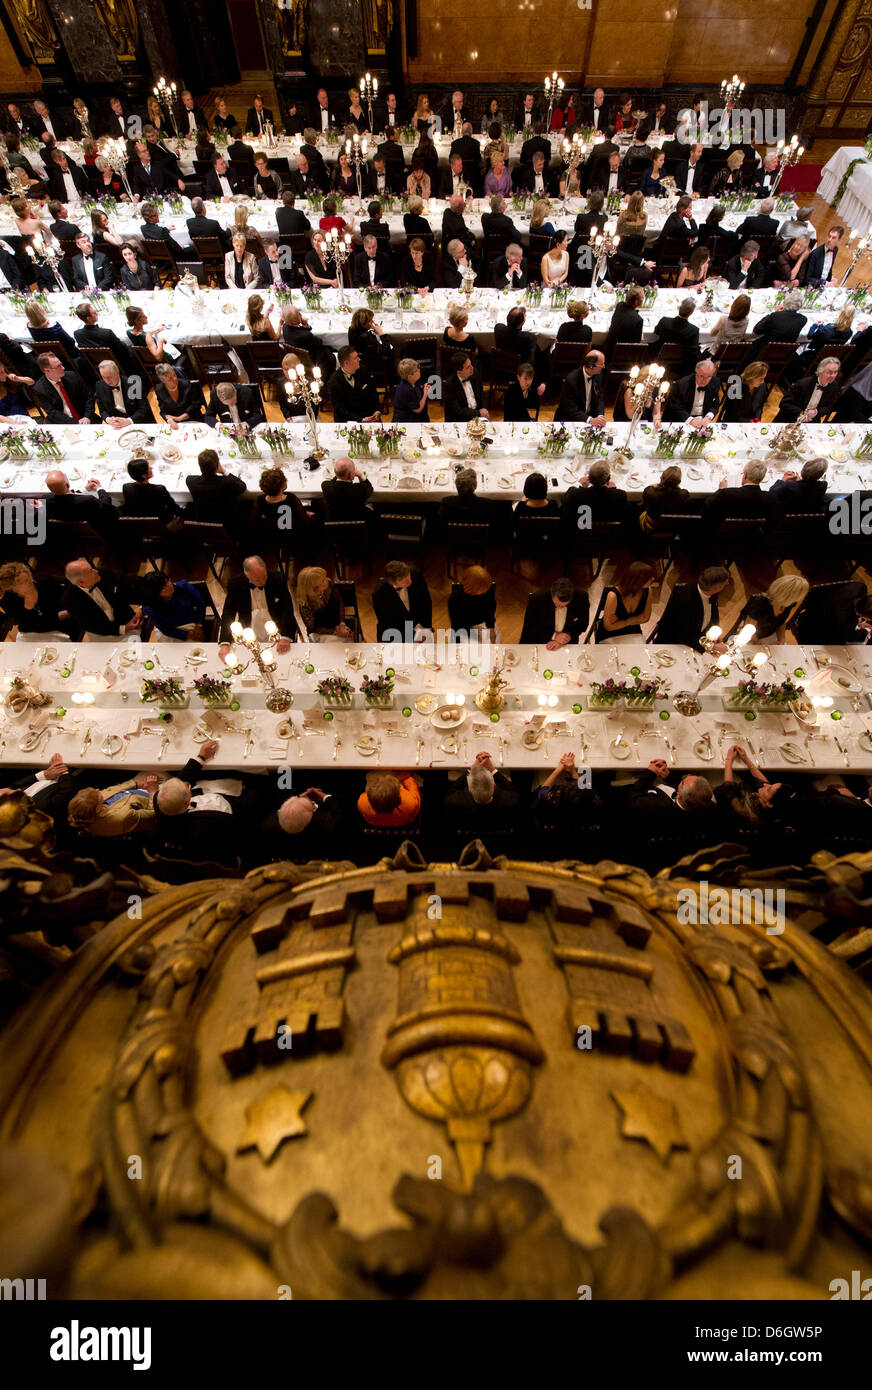 The emblem of Hamburg is seen above the guests attending the Matthiae Mahlzeit Banquet in the large banquet room of Hamburg's town hall in Hamburg, Germany, 24 February 2012. European Commission President Jose Manuel Barroso and Deutsche Bank chairman Juergen Fitschen are honoury guests at the  Matthiae-Mahlzeit Banquet in Hamburg's City Hall. Photo: CHRISTIAN CHARISIUS Stock Photo